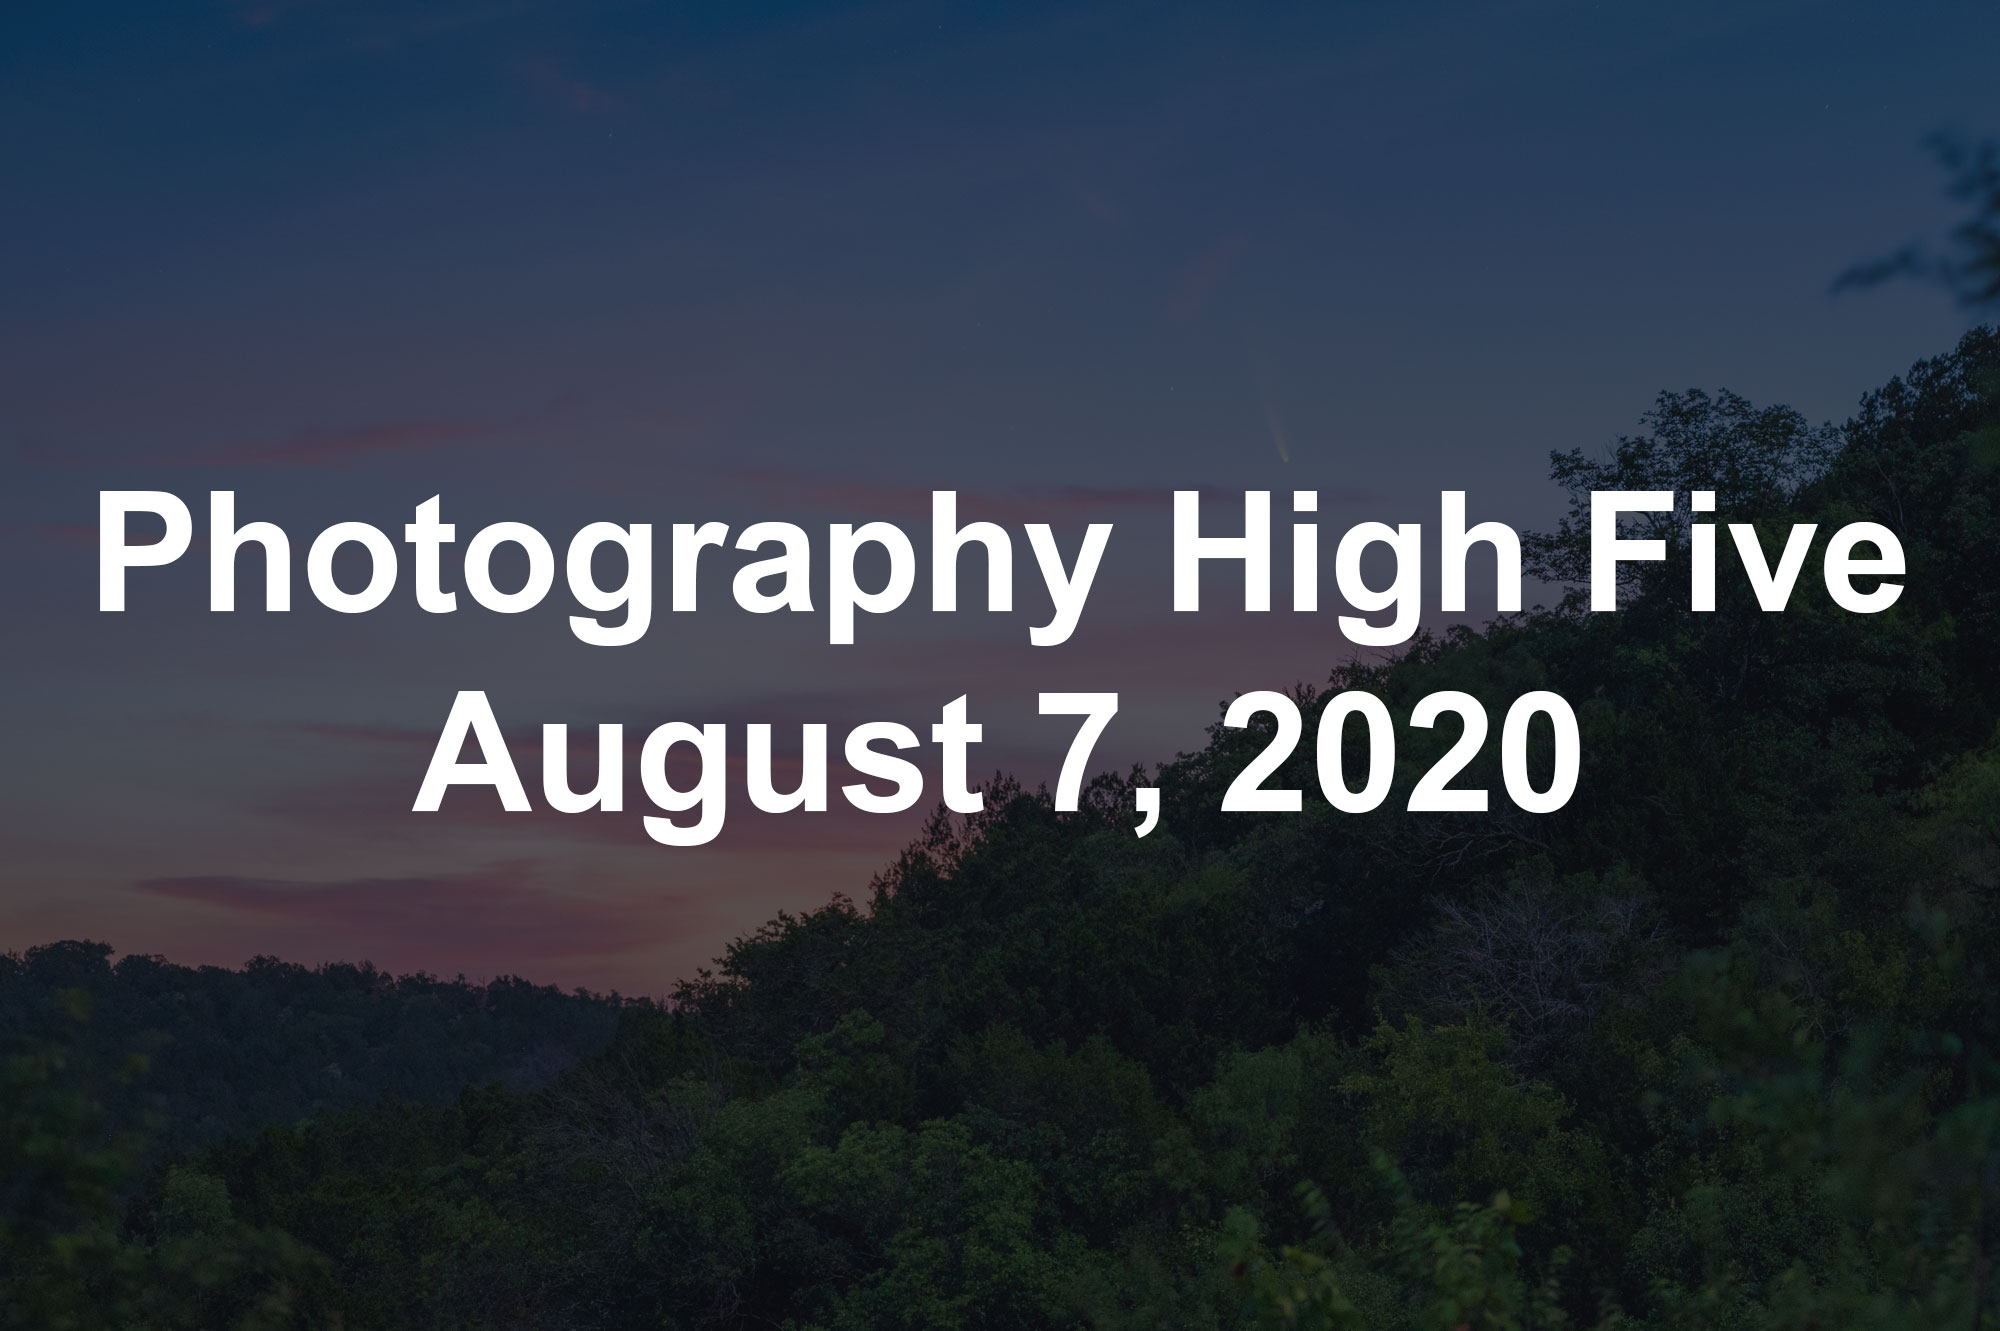 Photography High Five August 7, 2020